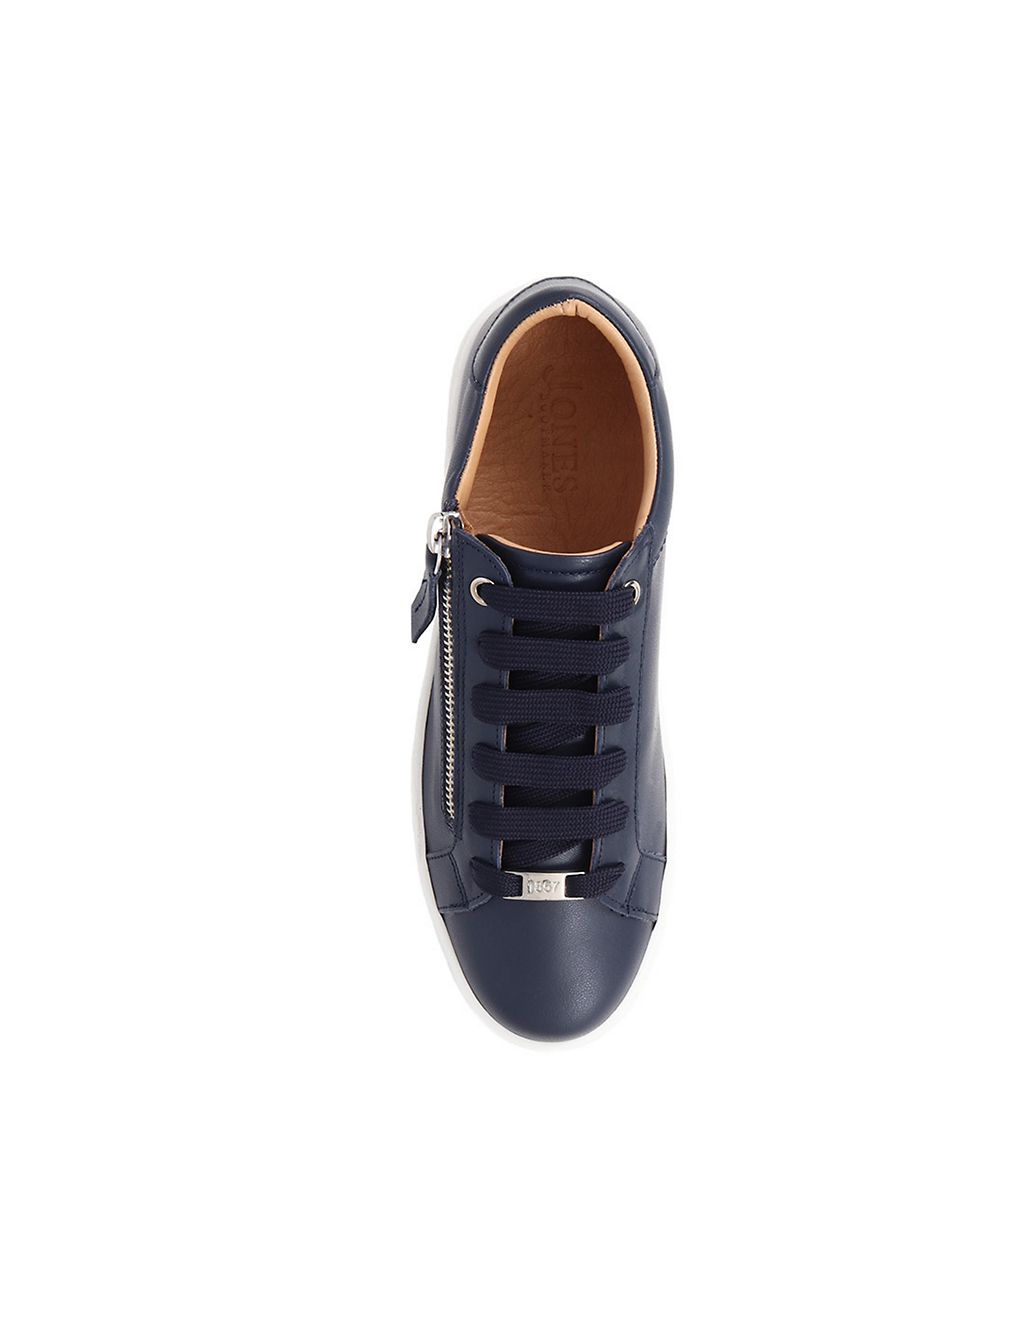 Leather Lace Up Flatform Trainers 7 of 7